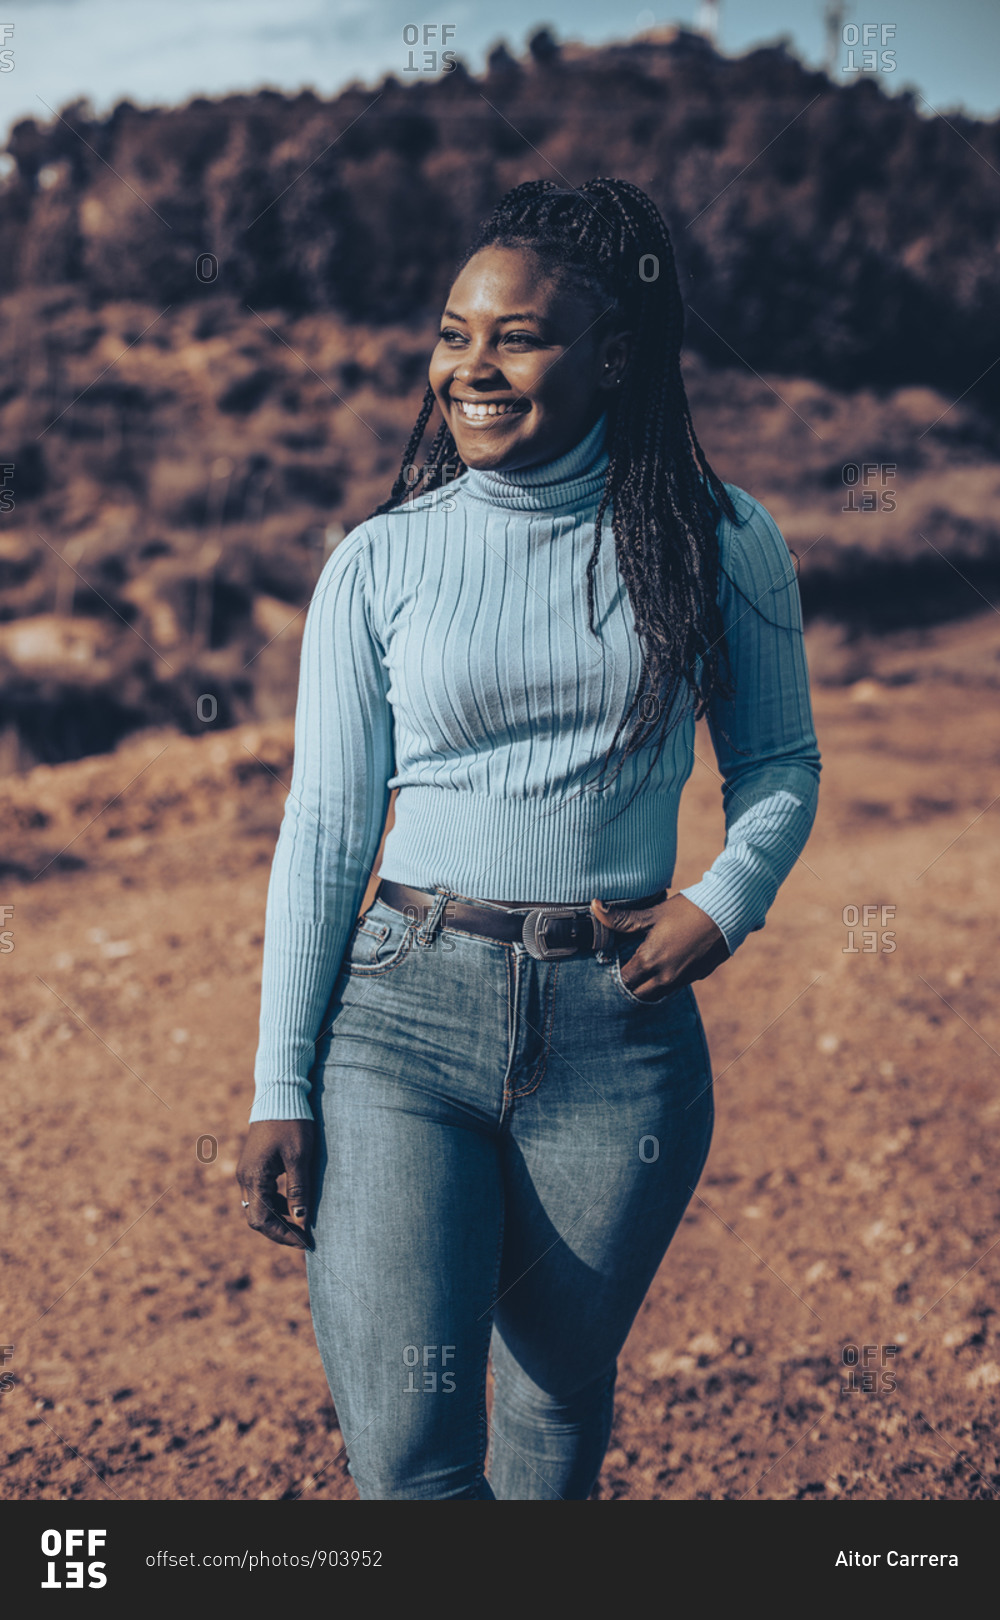 Side view of a woman with braids wearing a blue turtleneck sweater standing in a rural setting